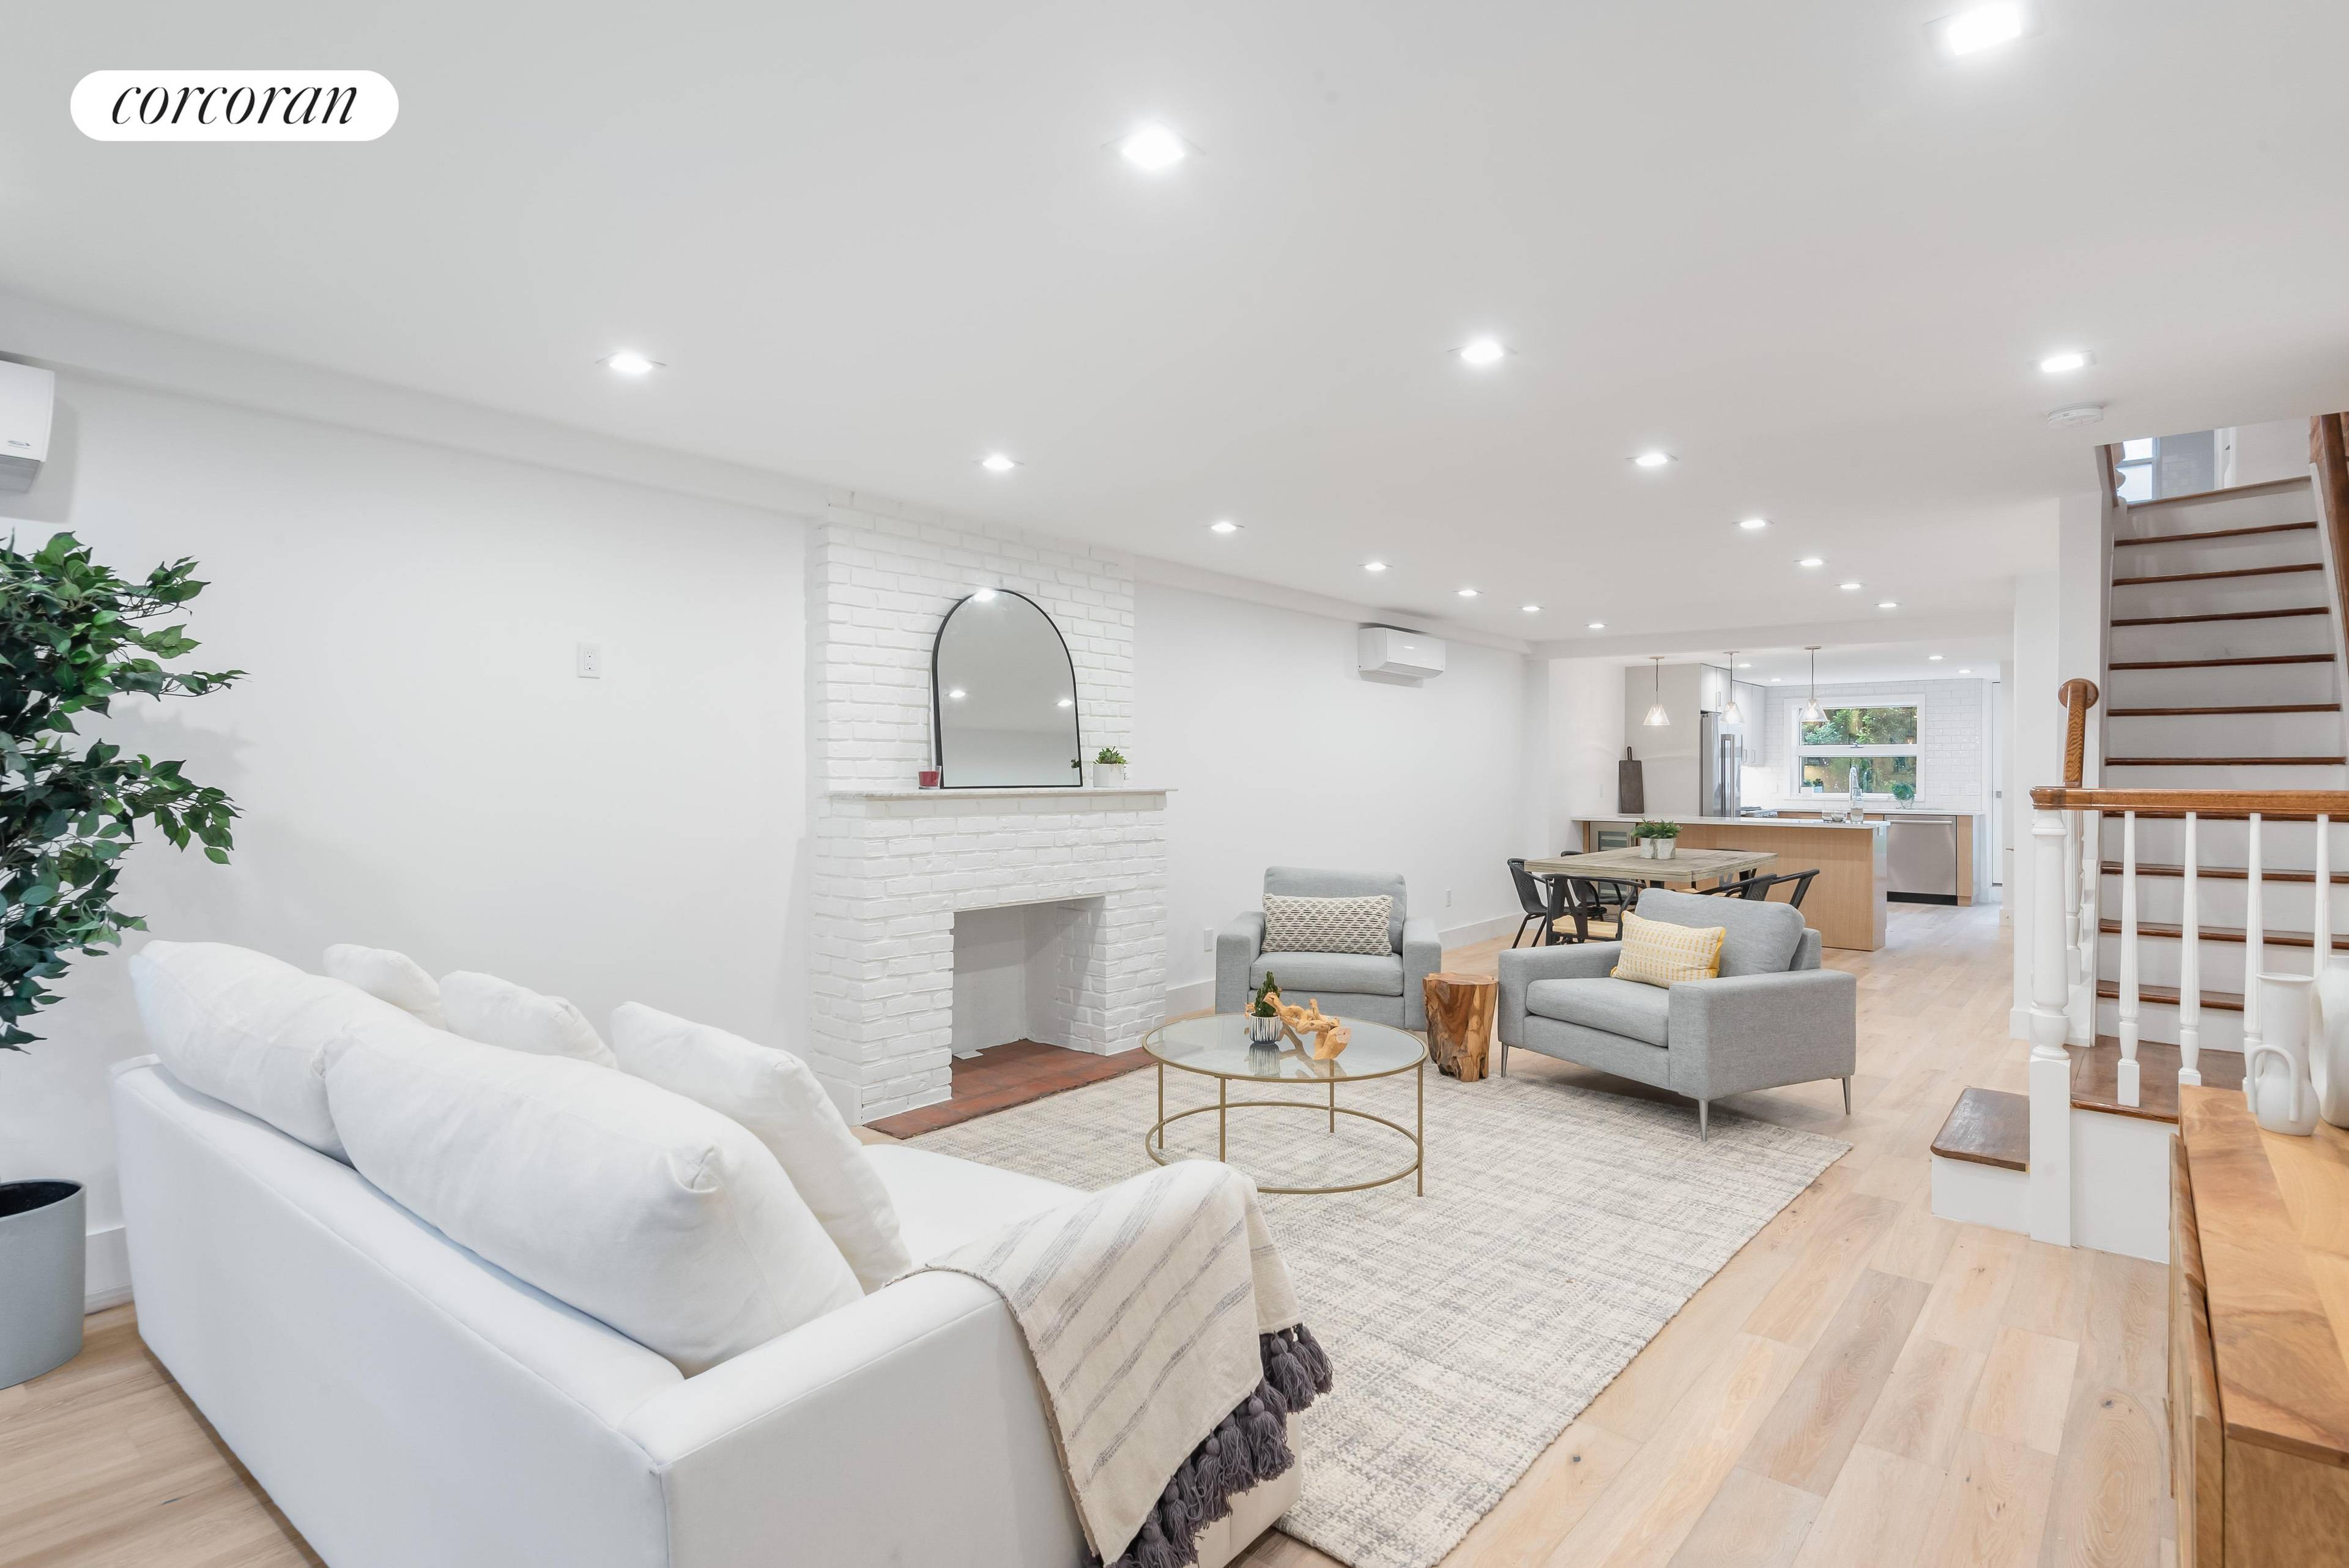 125 2 Place is a stately three unit townhouse in coveted Carroll Gardens, offering a brand new renovation of the owner's duplex.